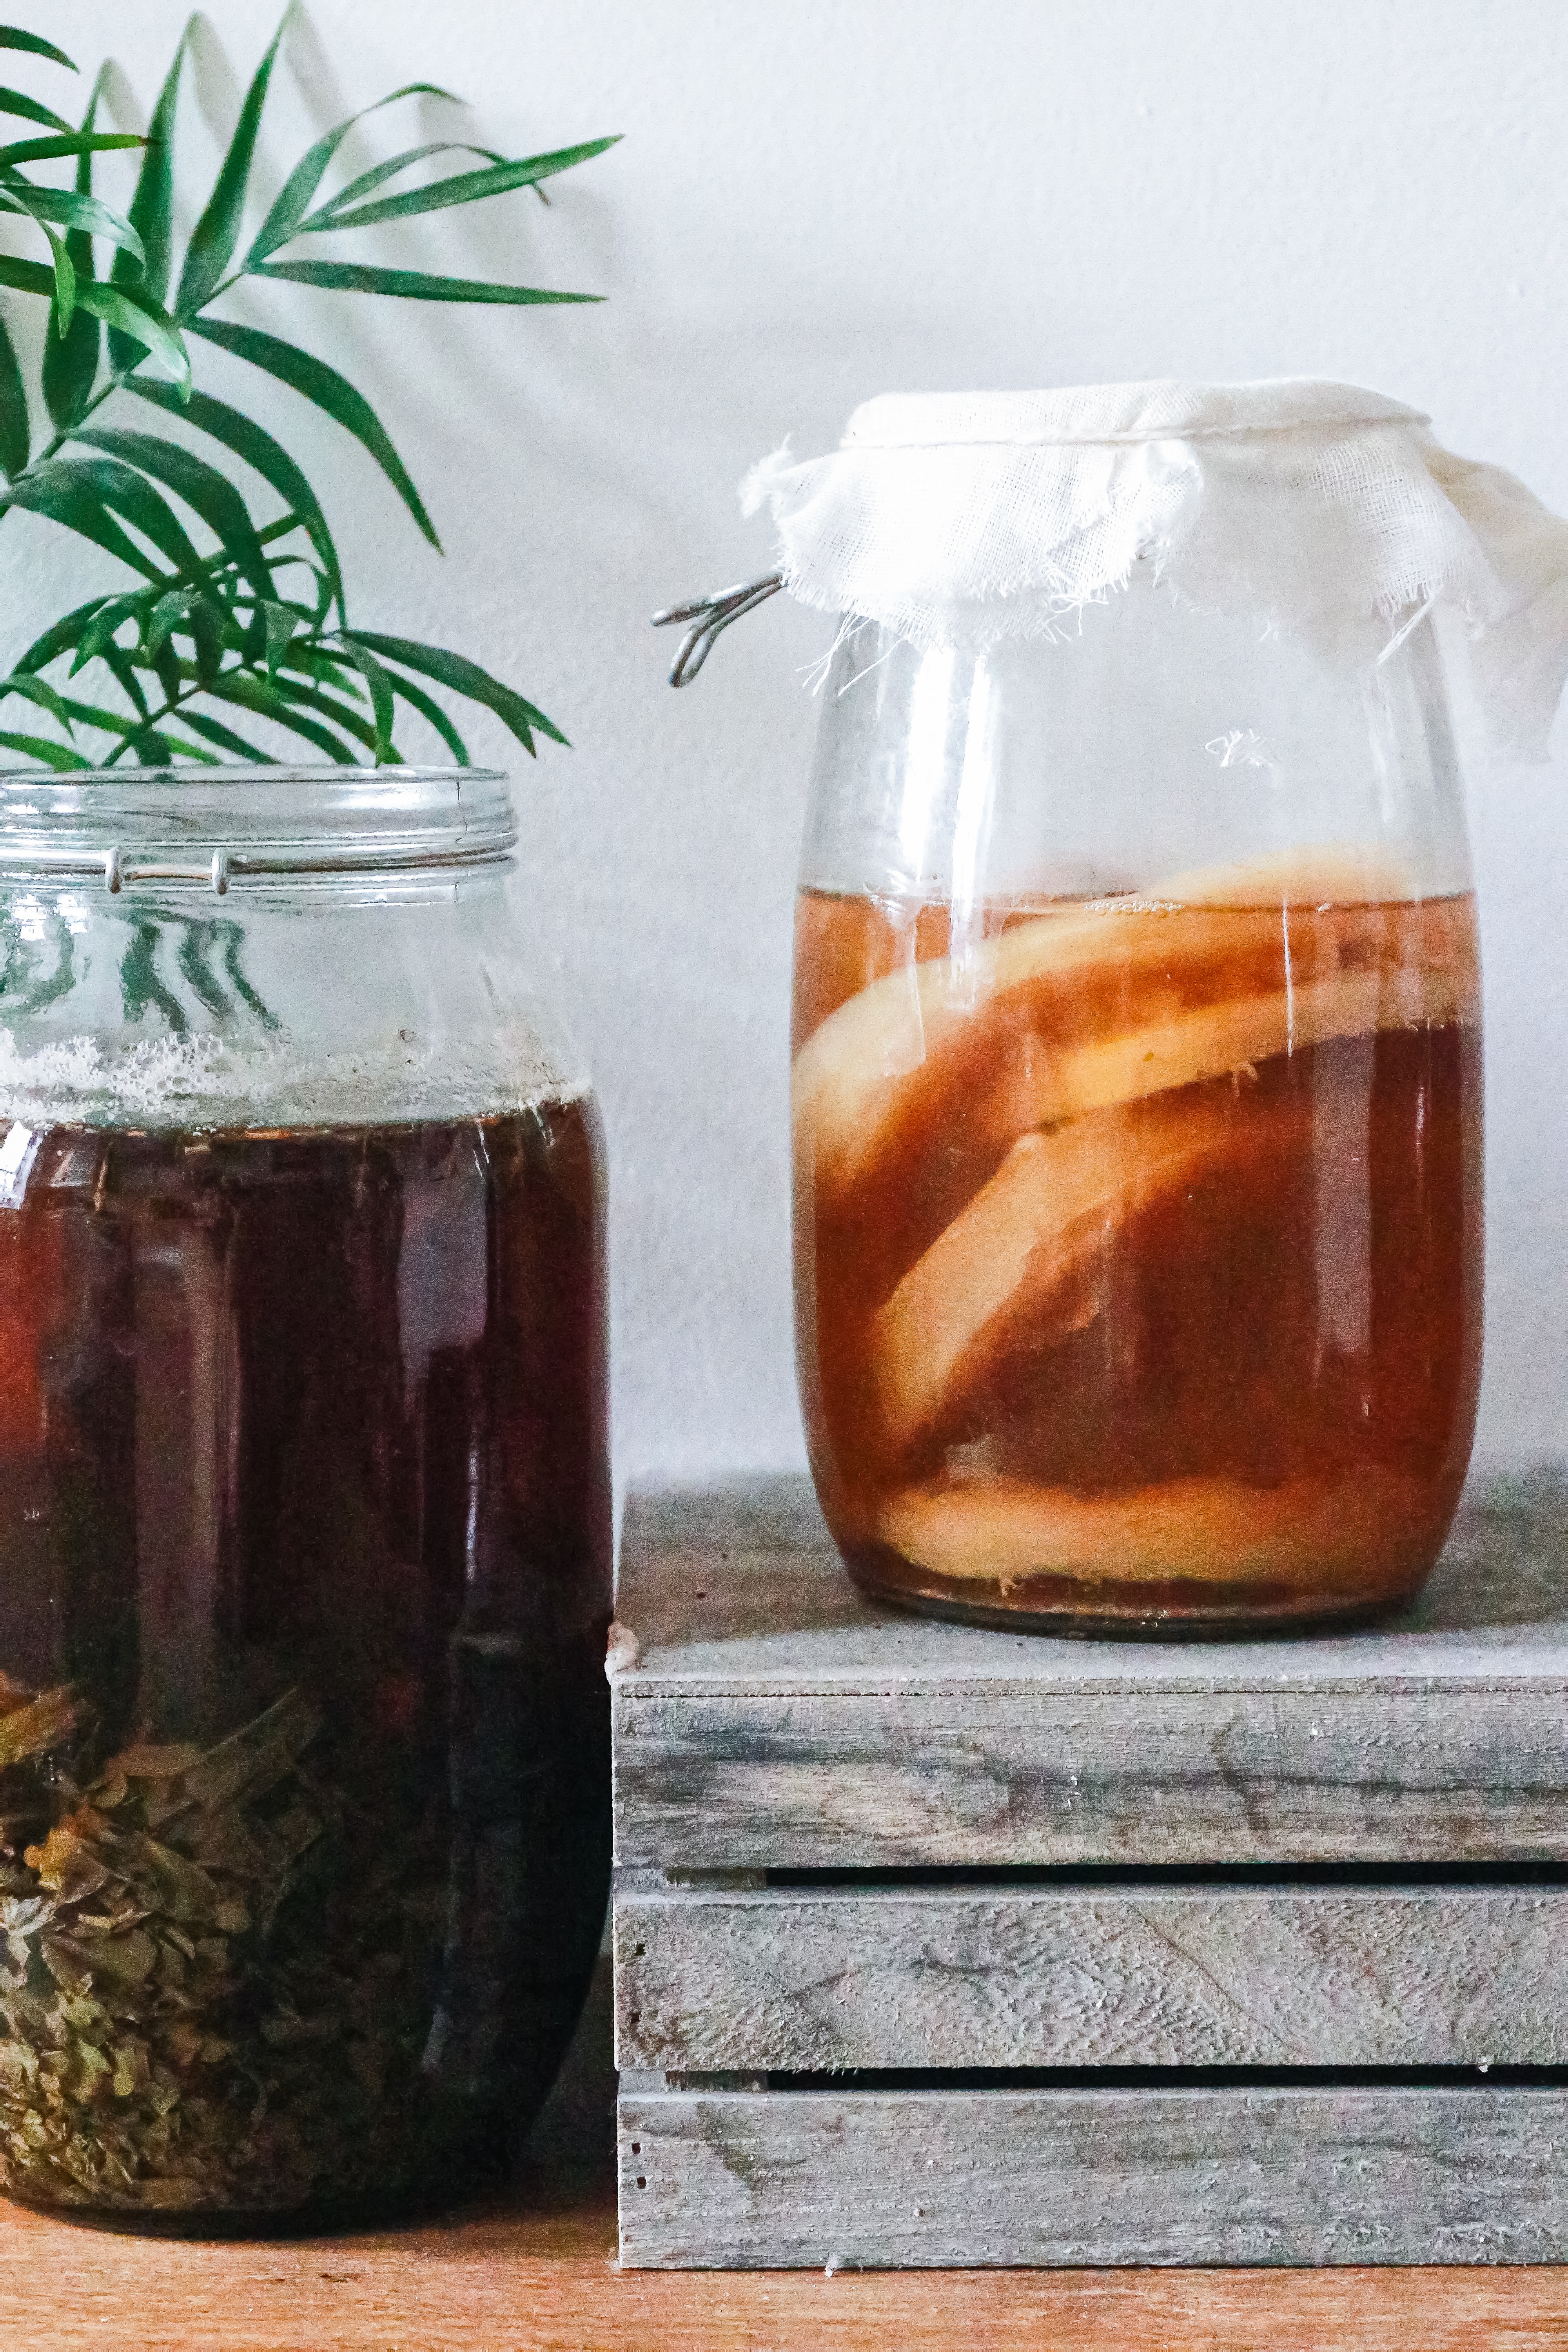 Two jars containing kombucha on a table with a leafy plant behind them.